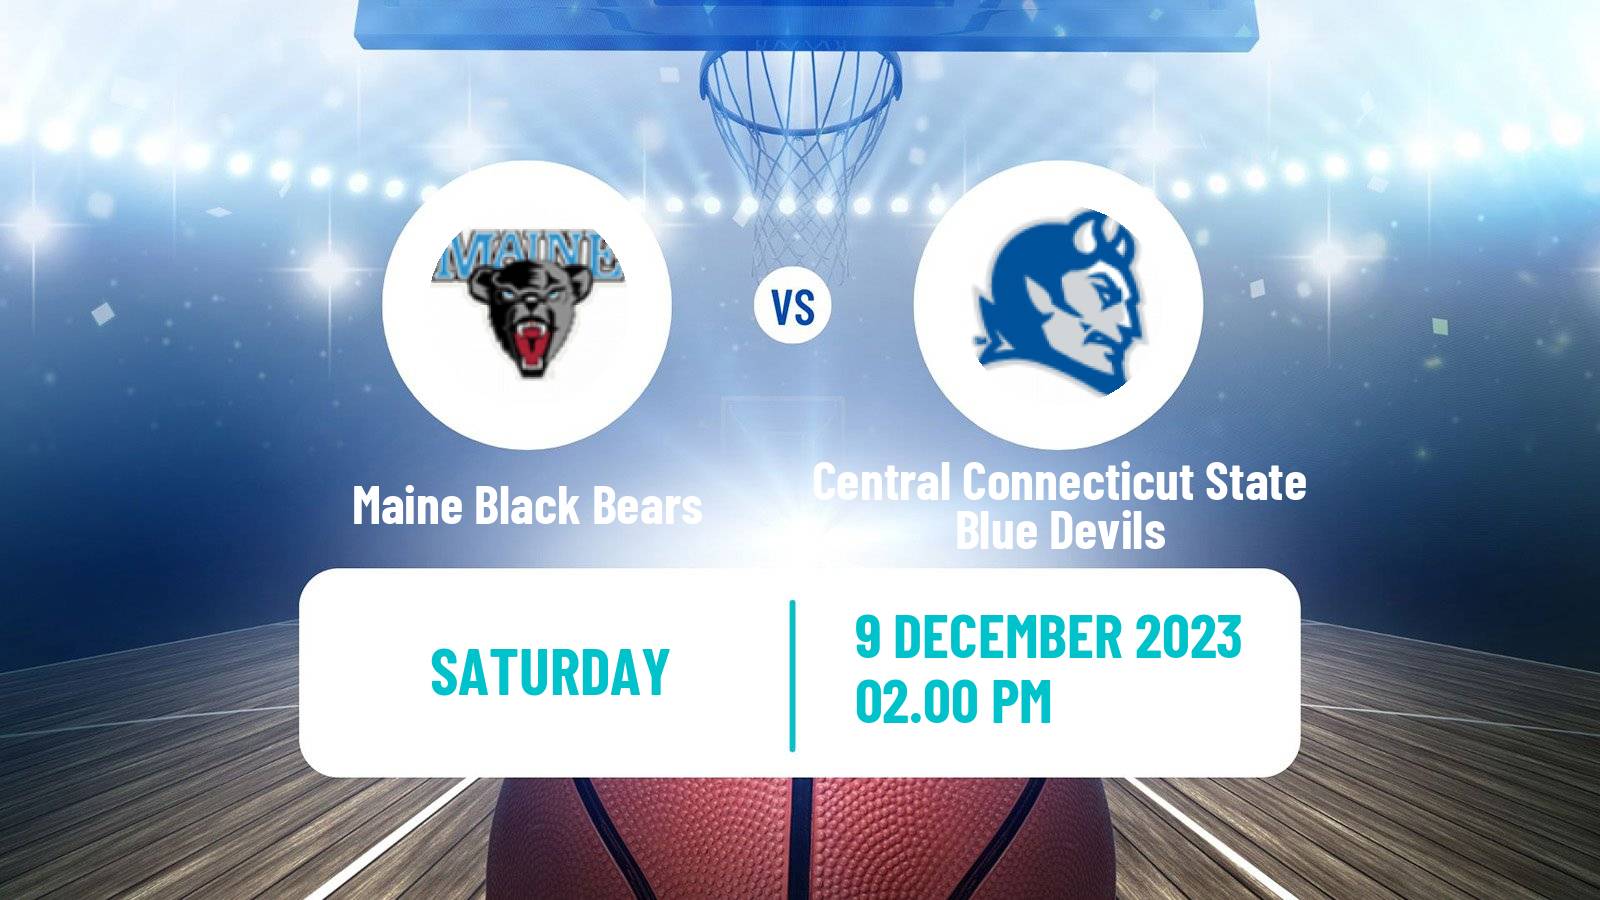 Basketball NCAA College Basketball Maine Black Bears - Central Connecticut State Blue Devils